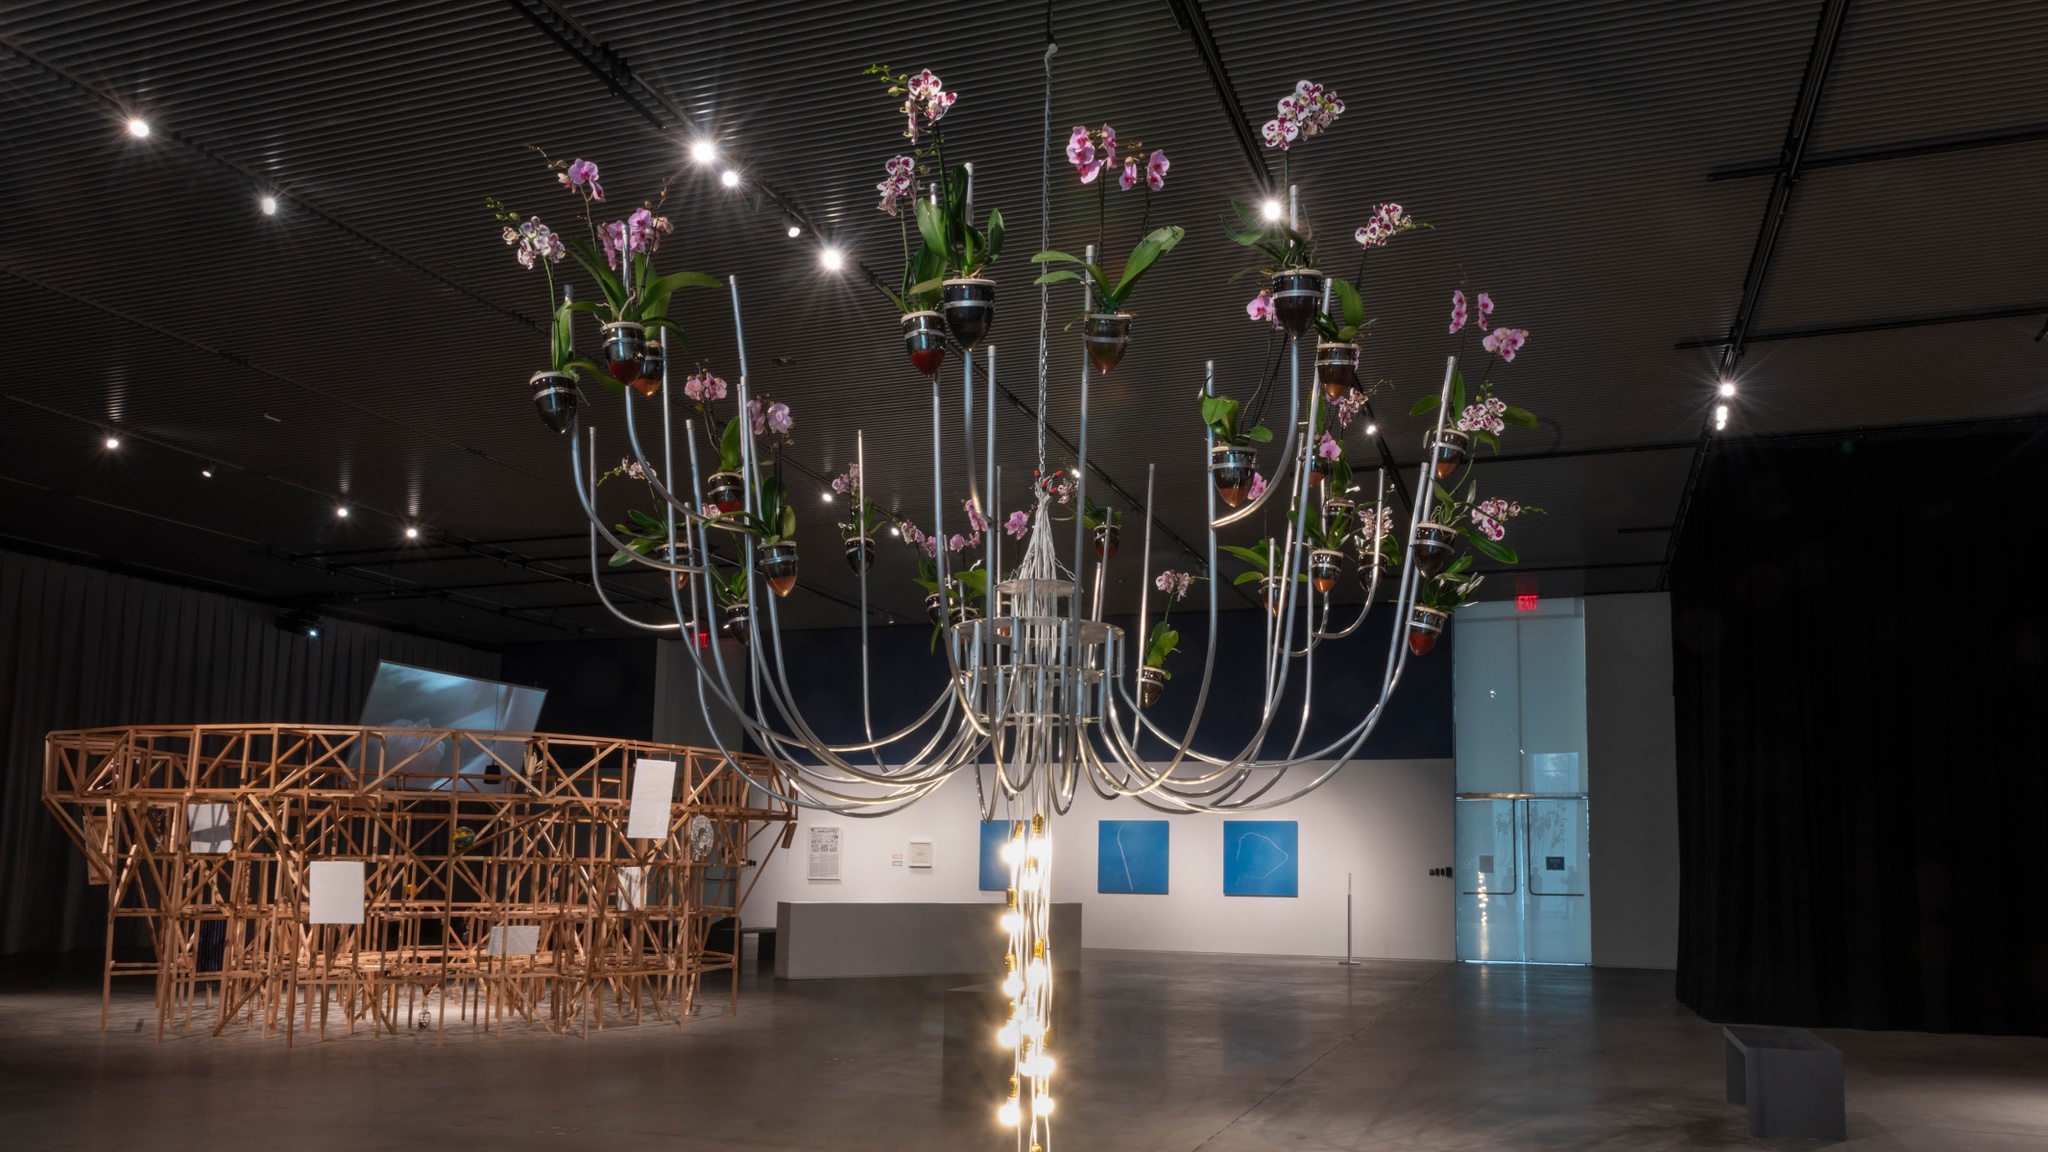 A chandelier-like sculpture hanging from the ceiling of an art gallery. The sculpture is made of thin, bent aluminum tubes. At the end of each tube is a ceramic vessel containing a purple orchid. LED light bulbs hang in a string down from the center of the sculpture to the floor. 